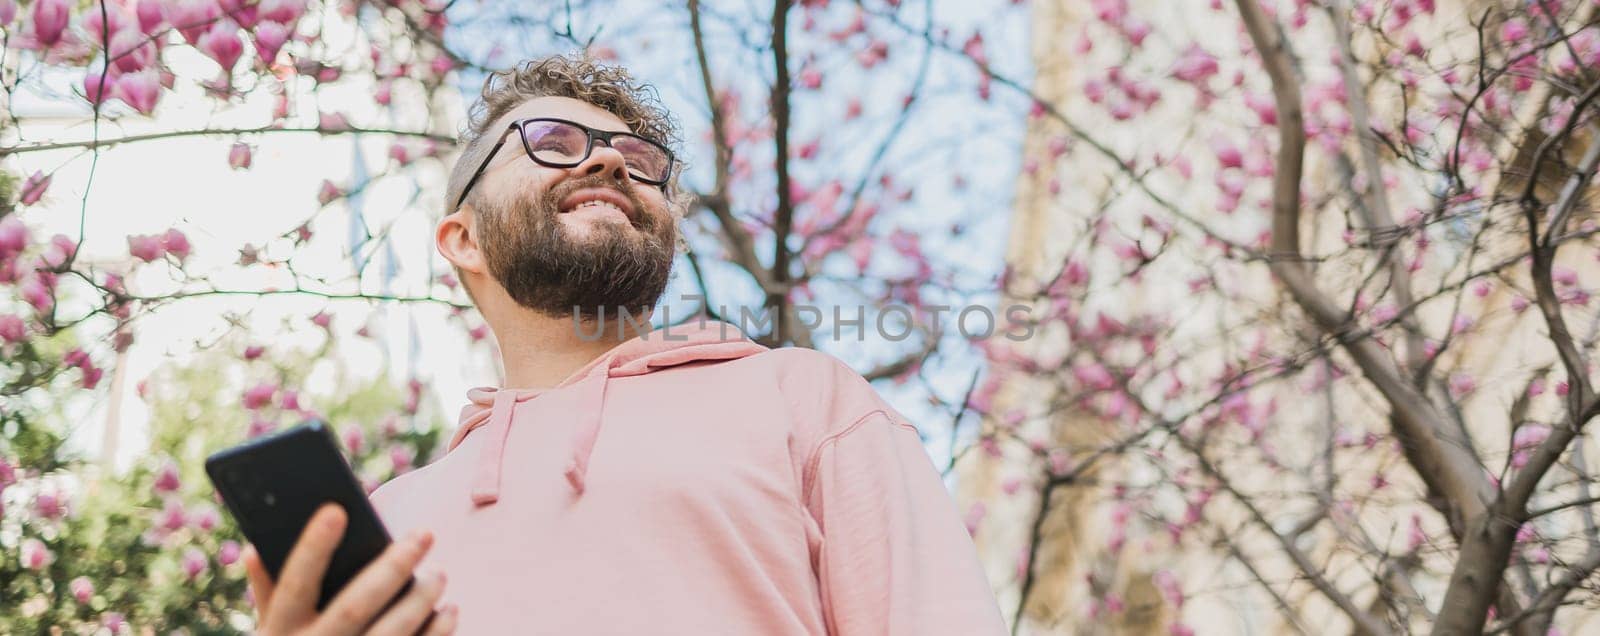 Spring day. Bearded man in pink shirt talking by phone. Spring pink sakura blossom. Handsome young man with smartphone. Fashionable man in trendy glasses. Bearded stylish man. Male fashion.